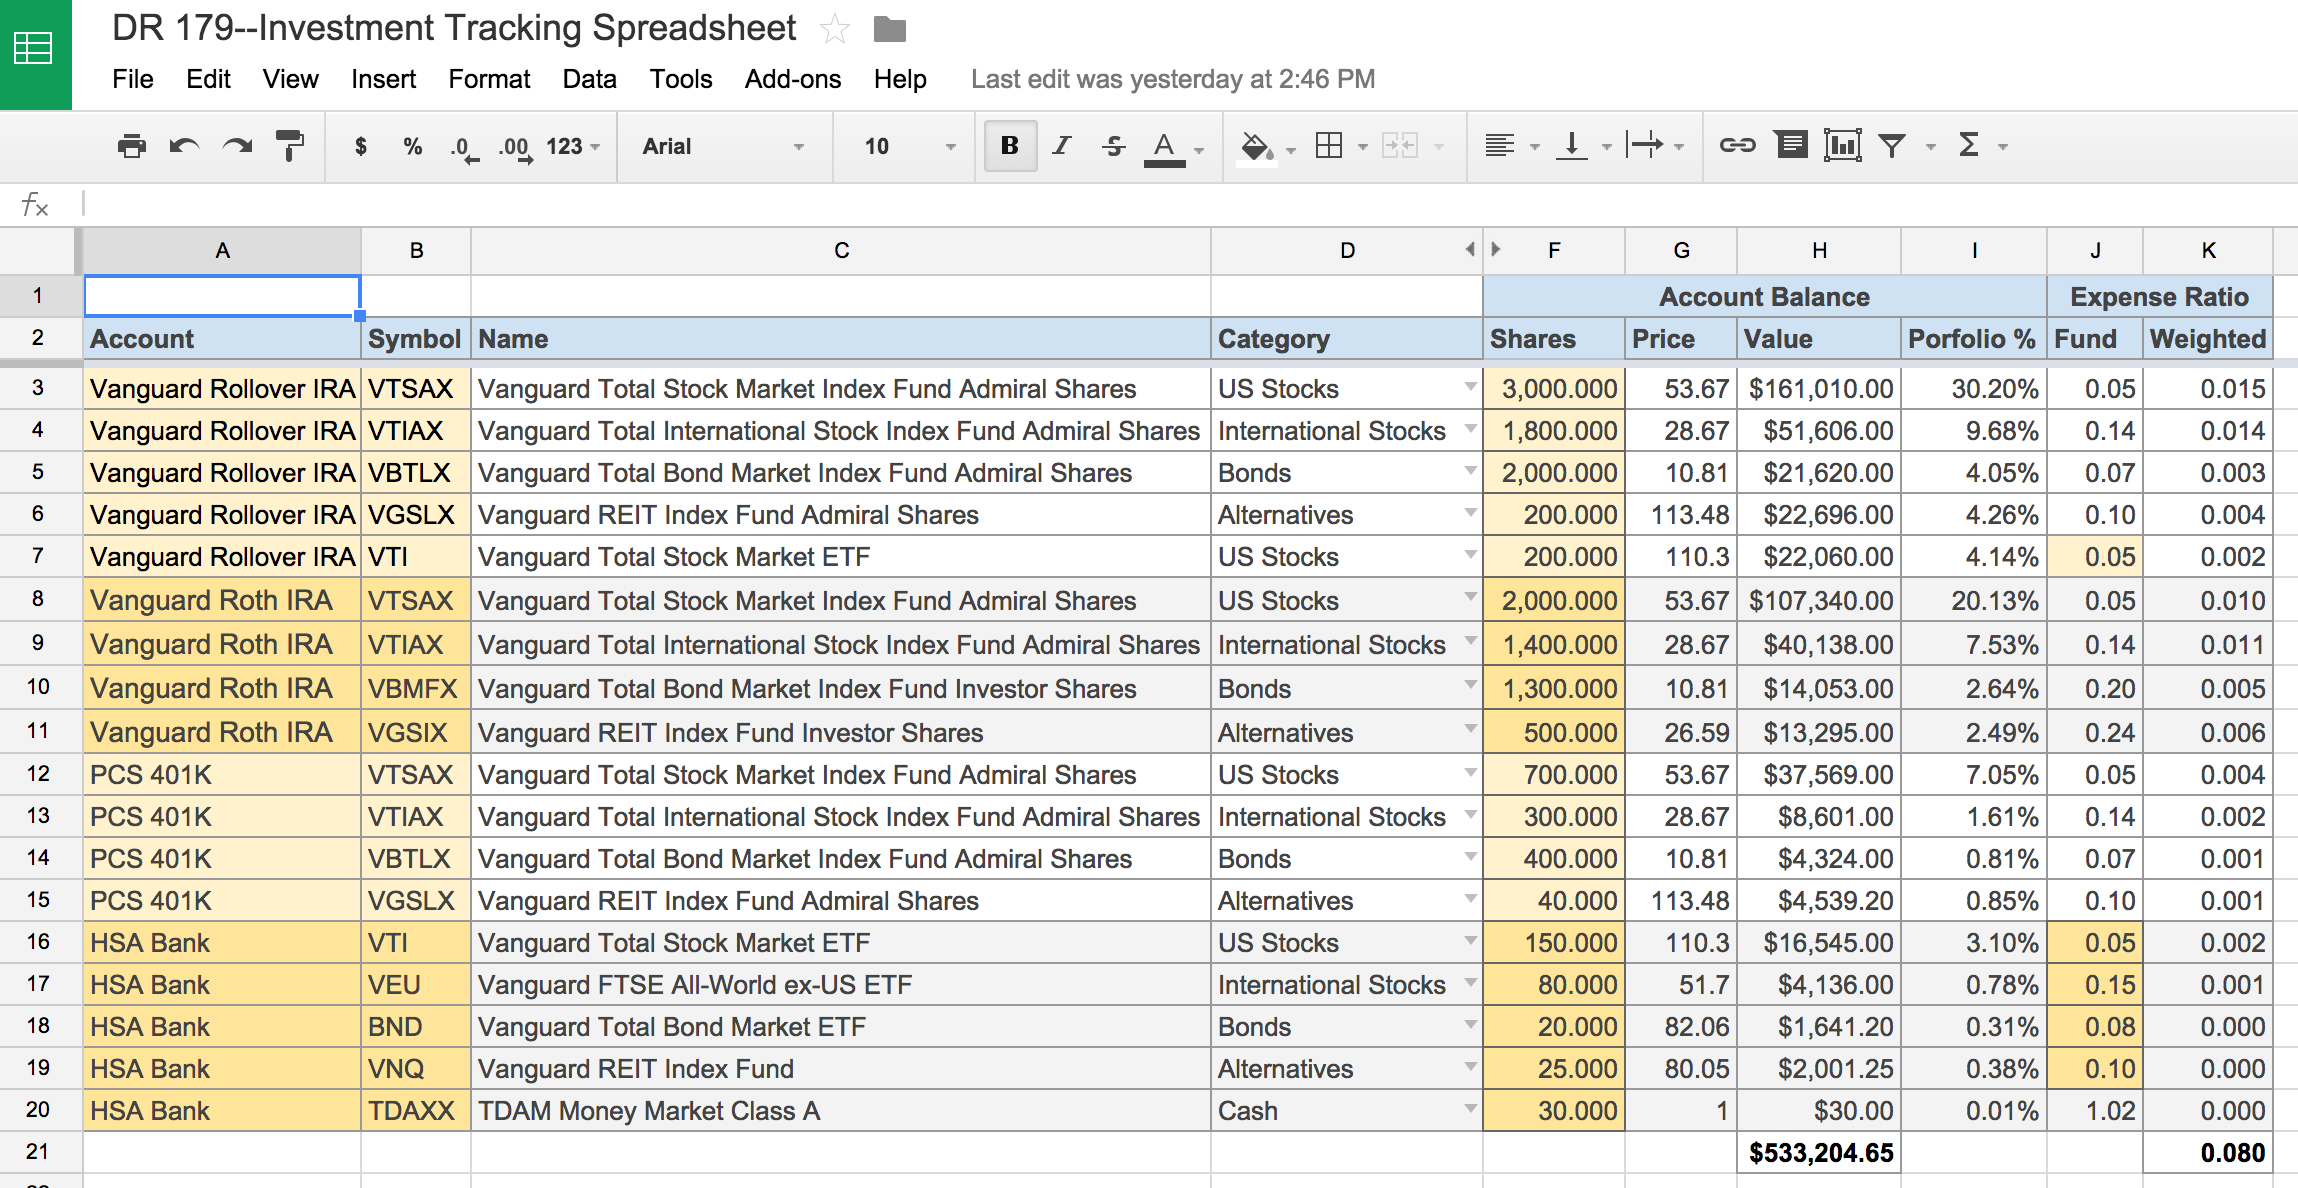 Llc Capital Account Spreadsheet within An Awesome And Free Investment Tracking Spreadsheet